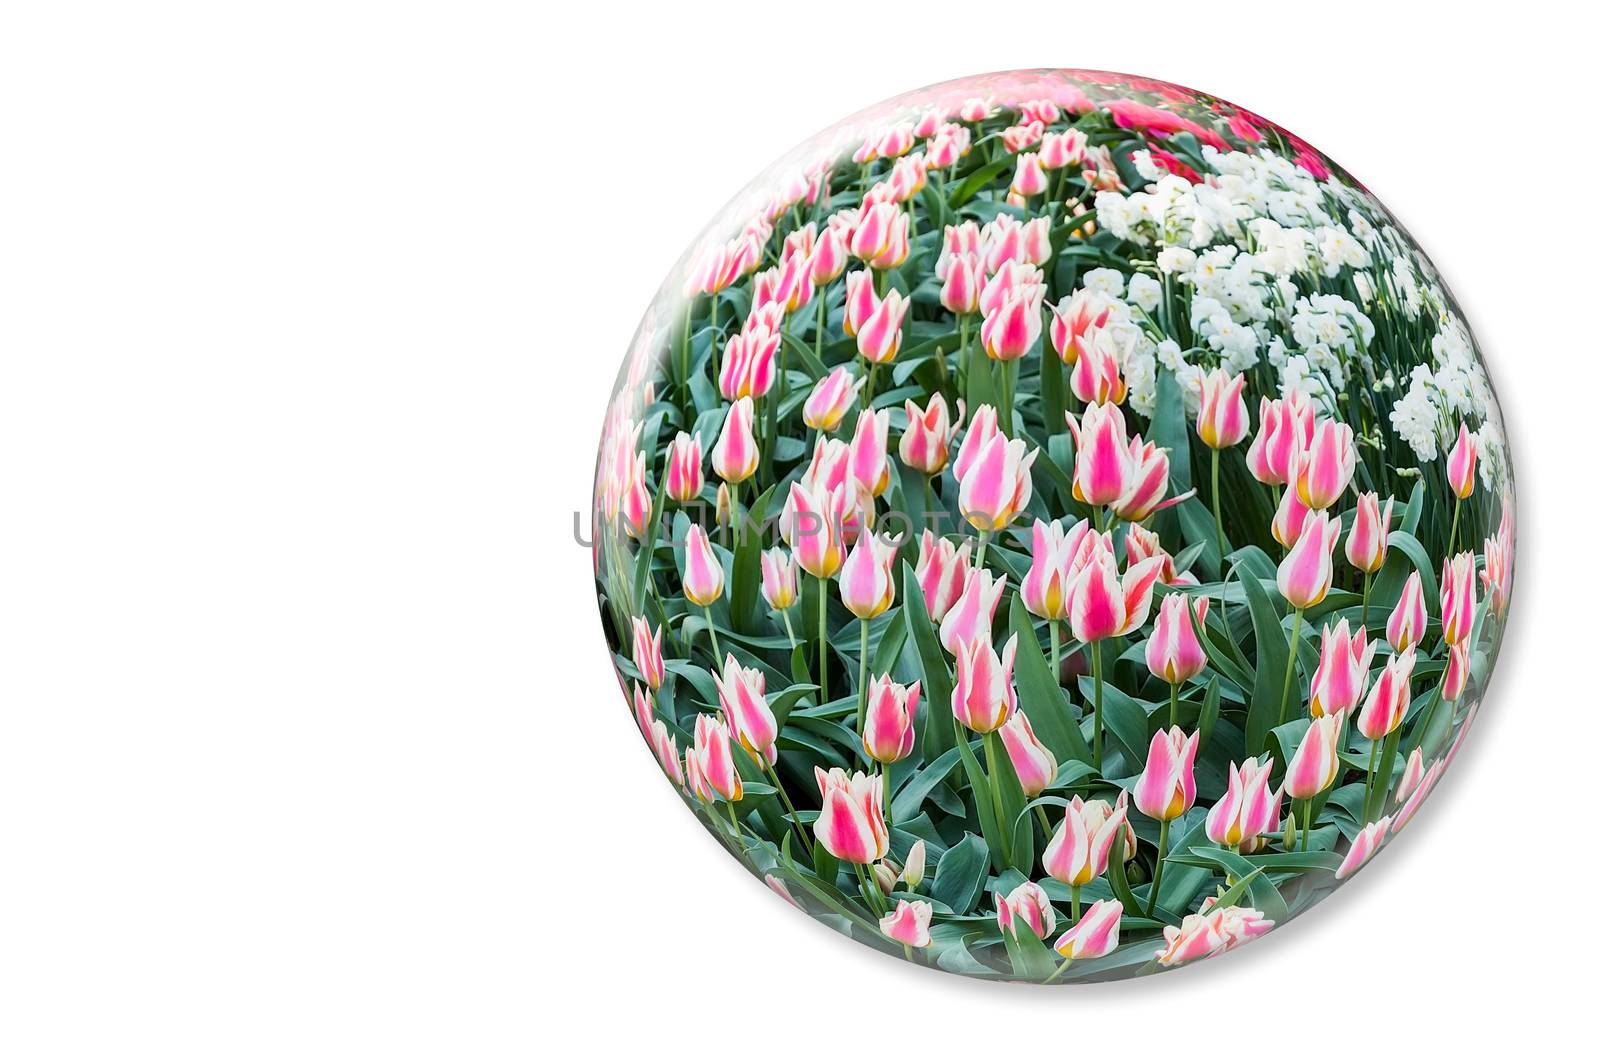 Glass sphere with red white tulips on white background by BenSchonewille